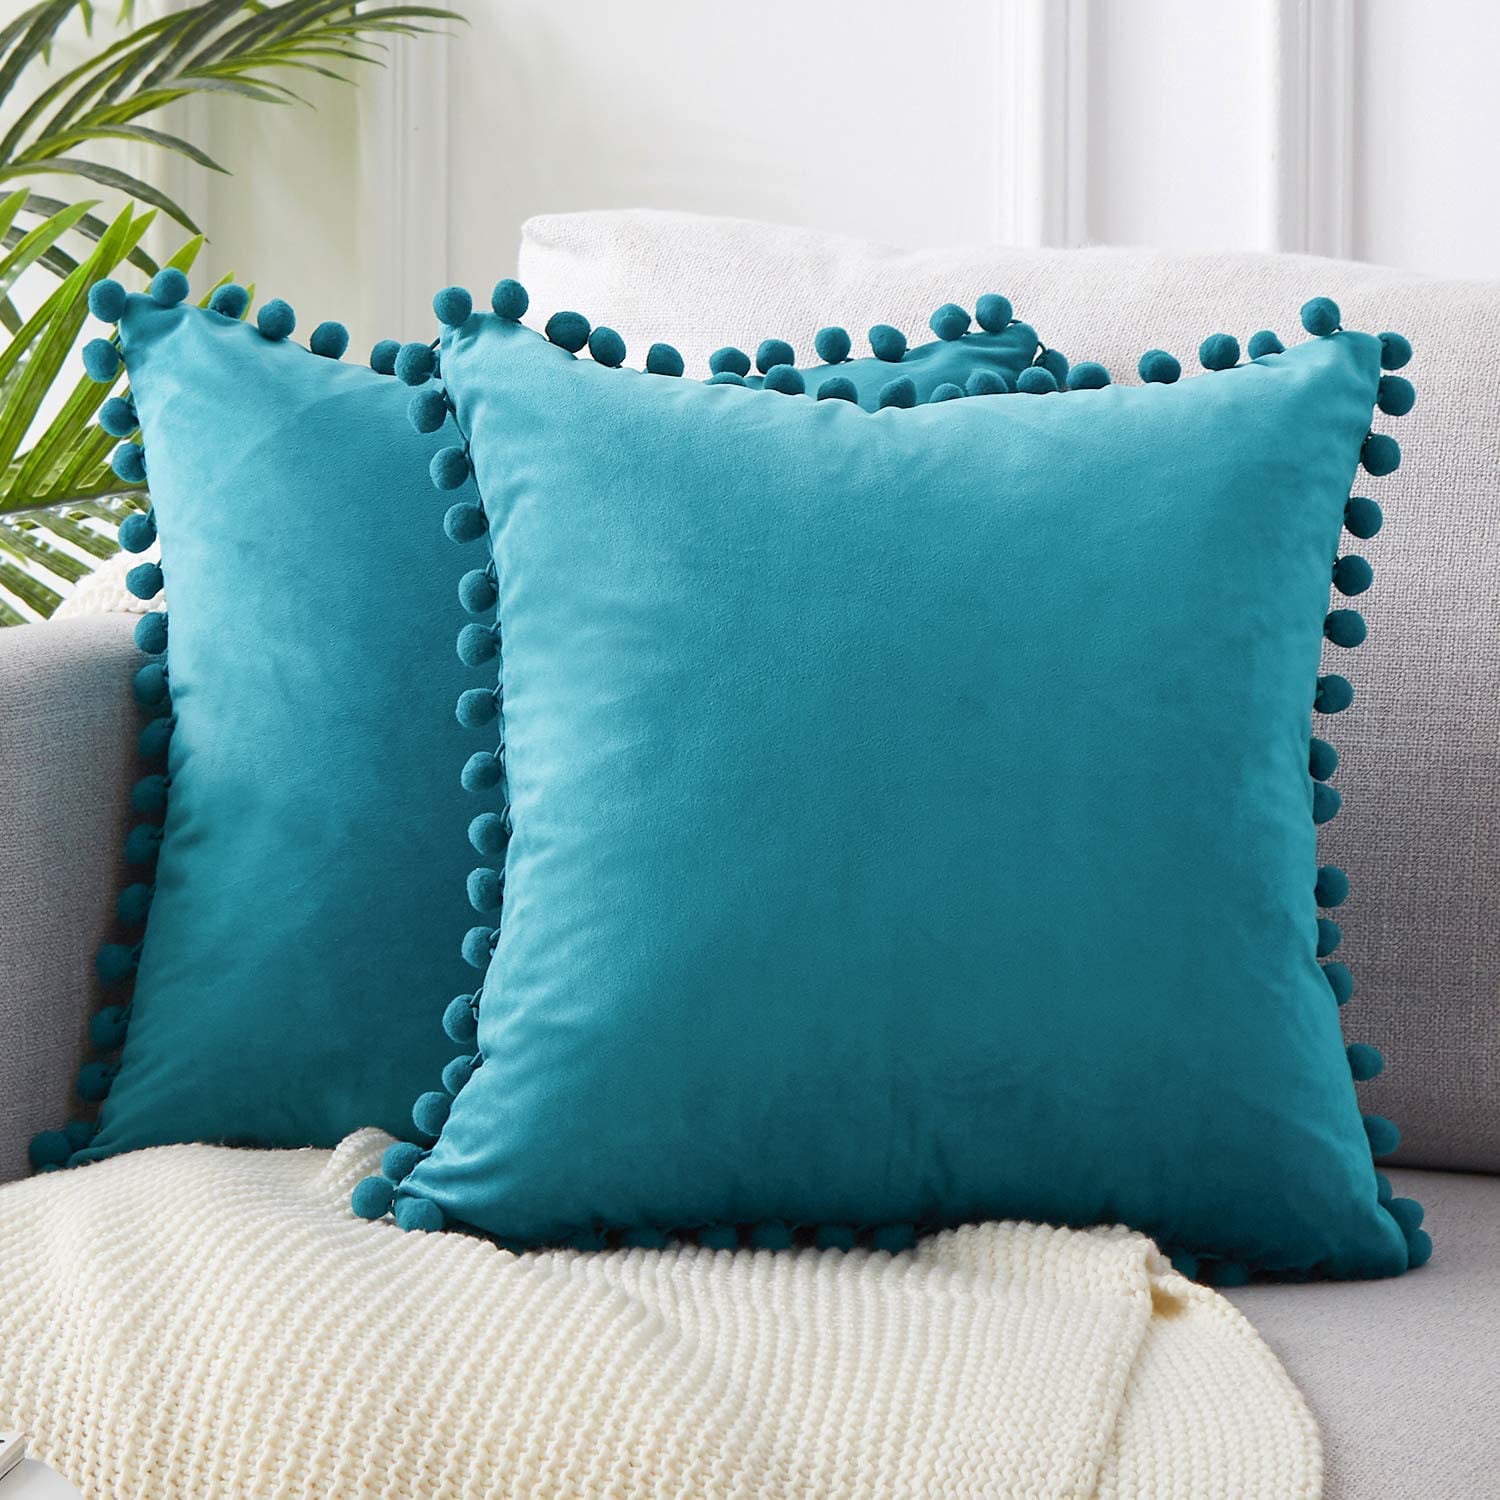 Topfinel Solid Decorative Throw Pillow Covers with Pom Poms Square Soft ...